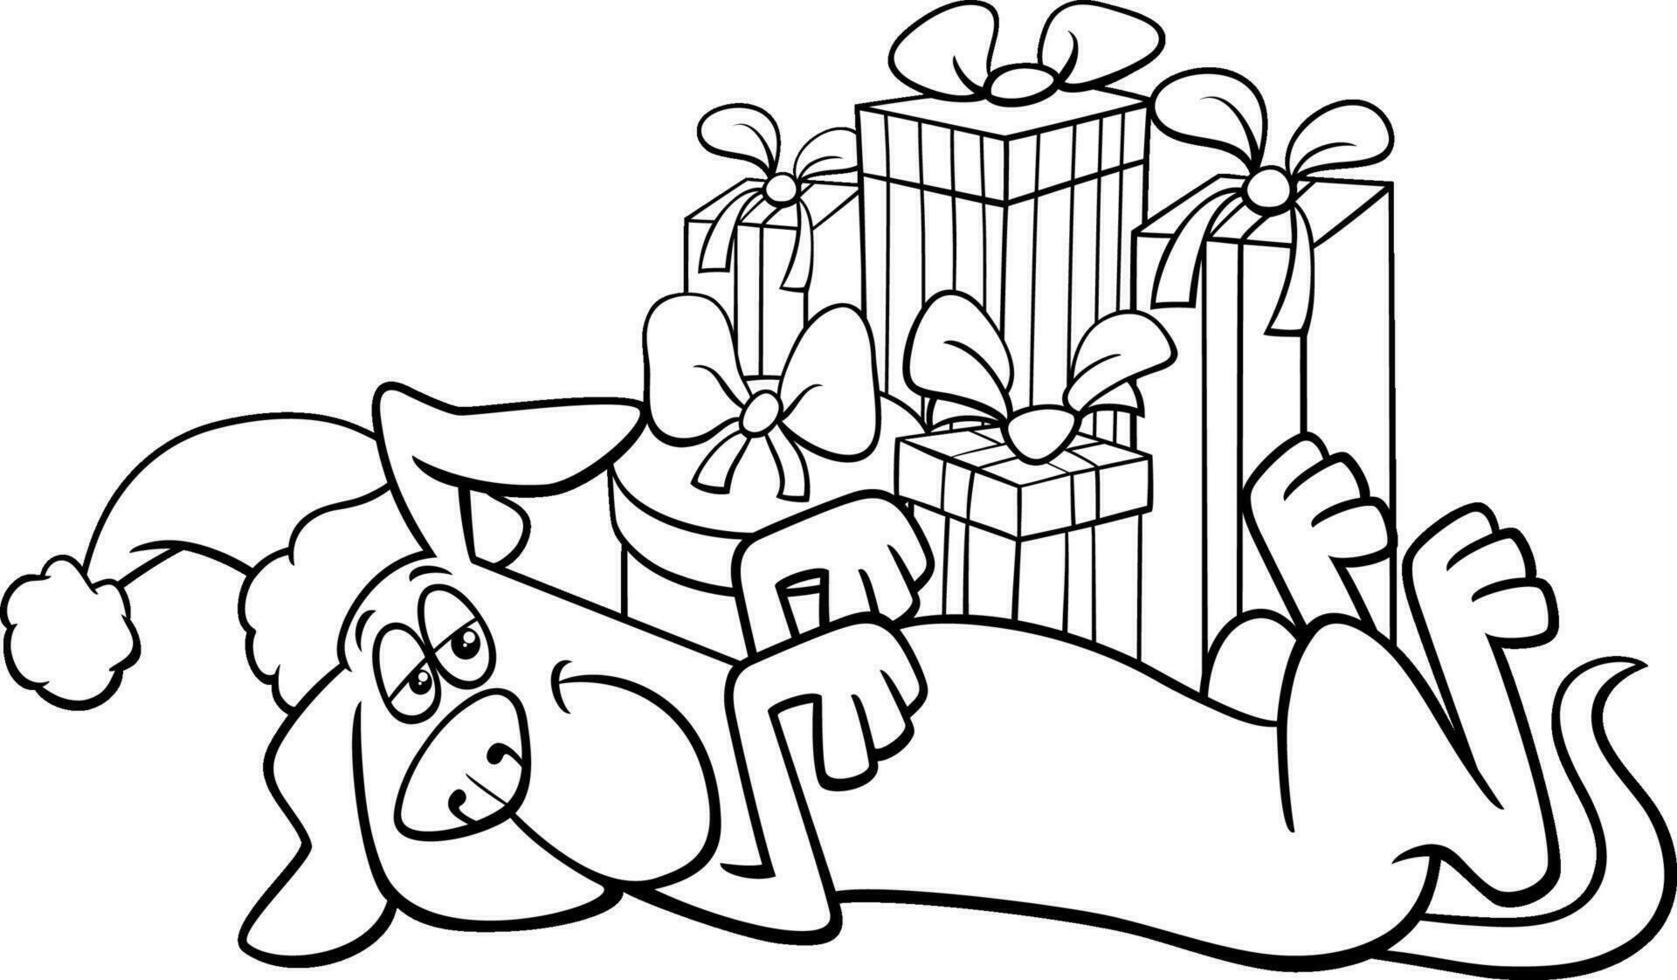 funny cartoon dog with Christmas presents coloring page vector